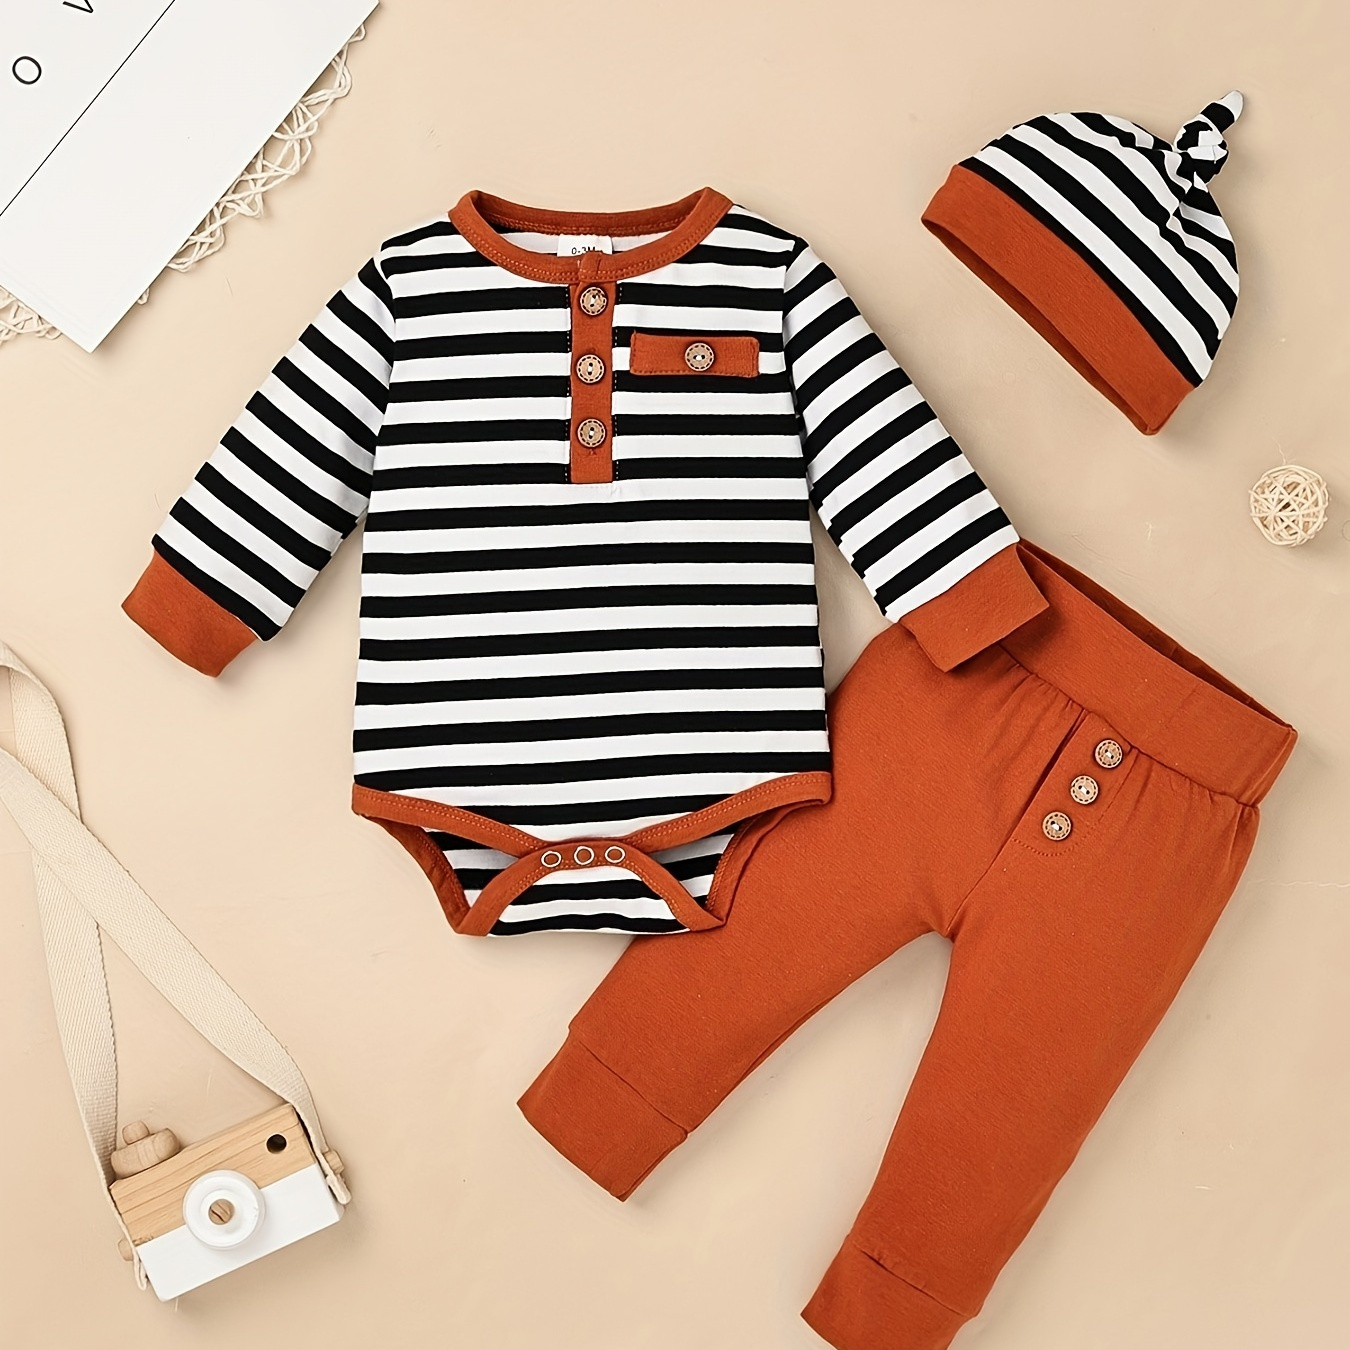 

Newborn Baby Boy Clothes Infant Long Sleeve Striped Romper Pants Hat 3pcs Set Fall Winter Outfits For 0-18months